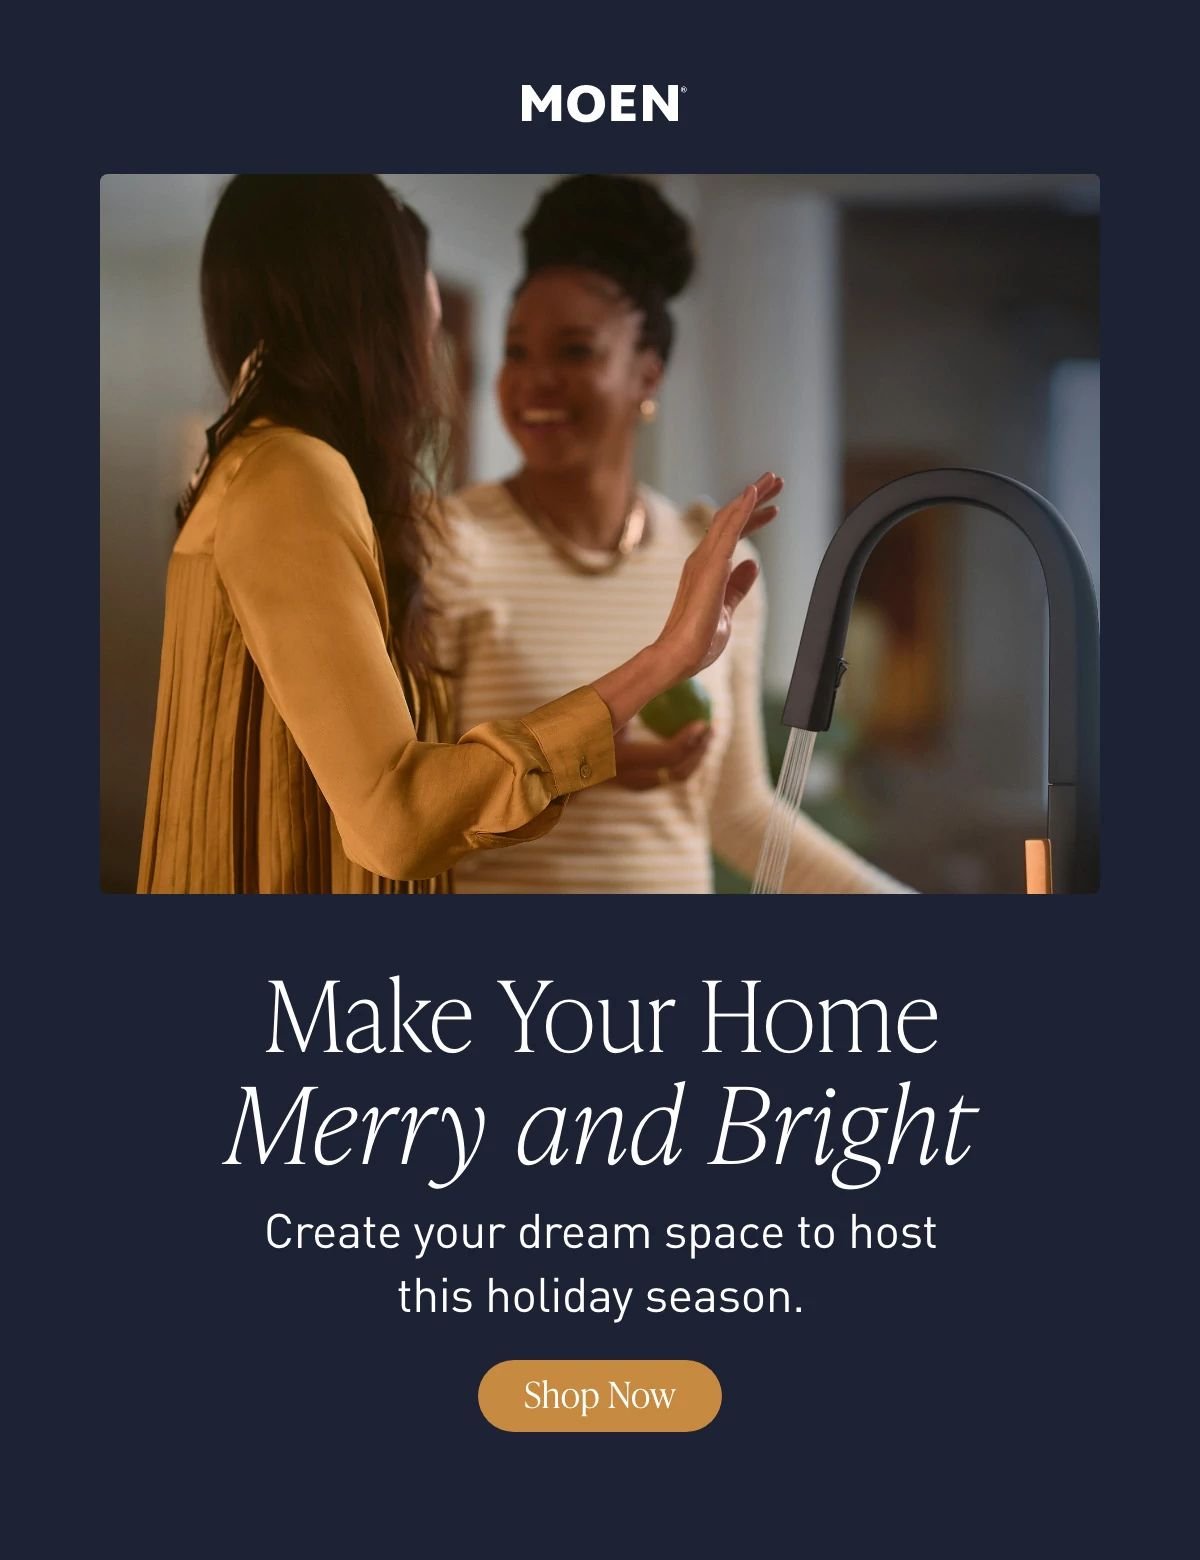 Make Your Home Merry and Bright